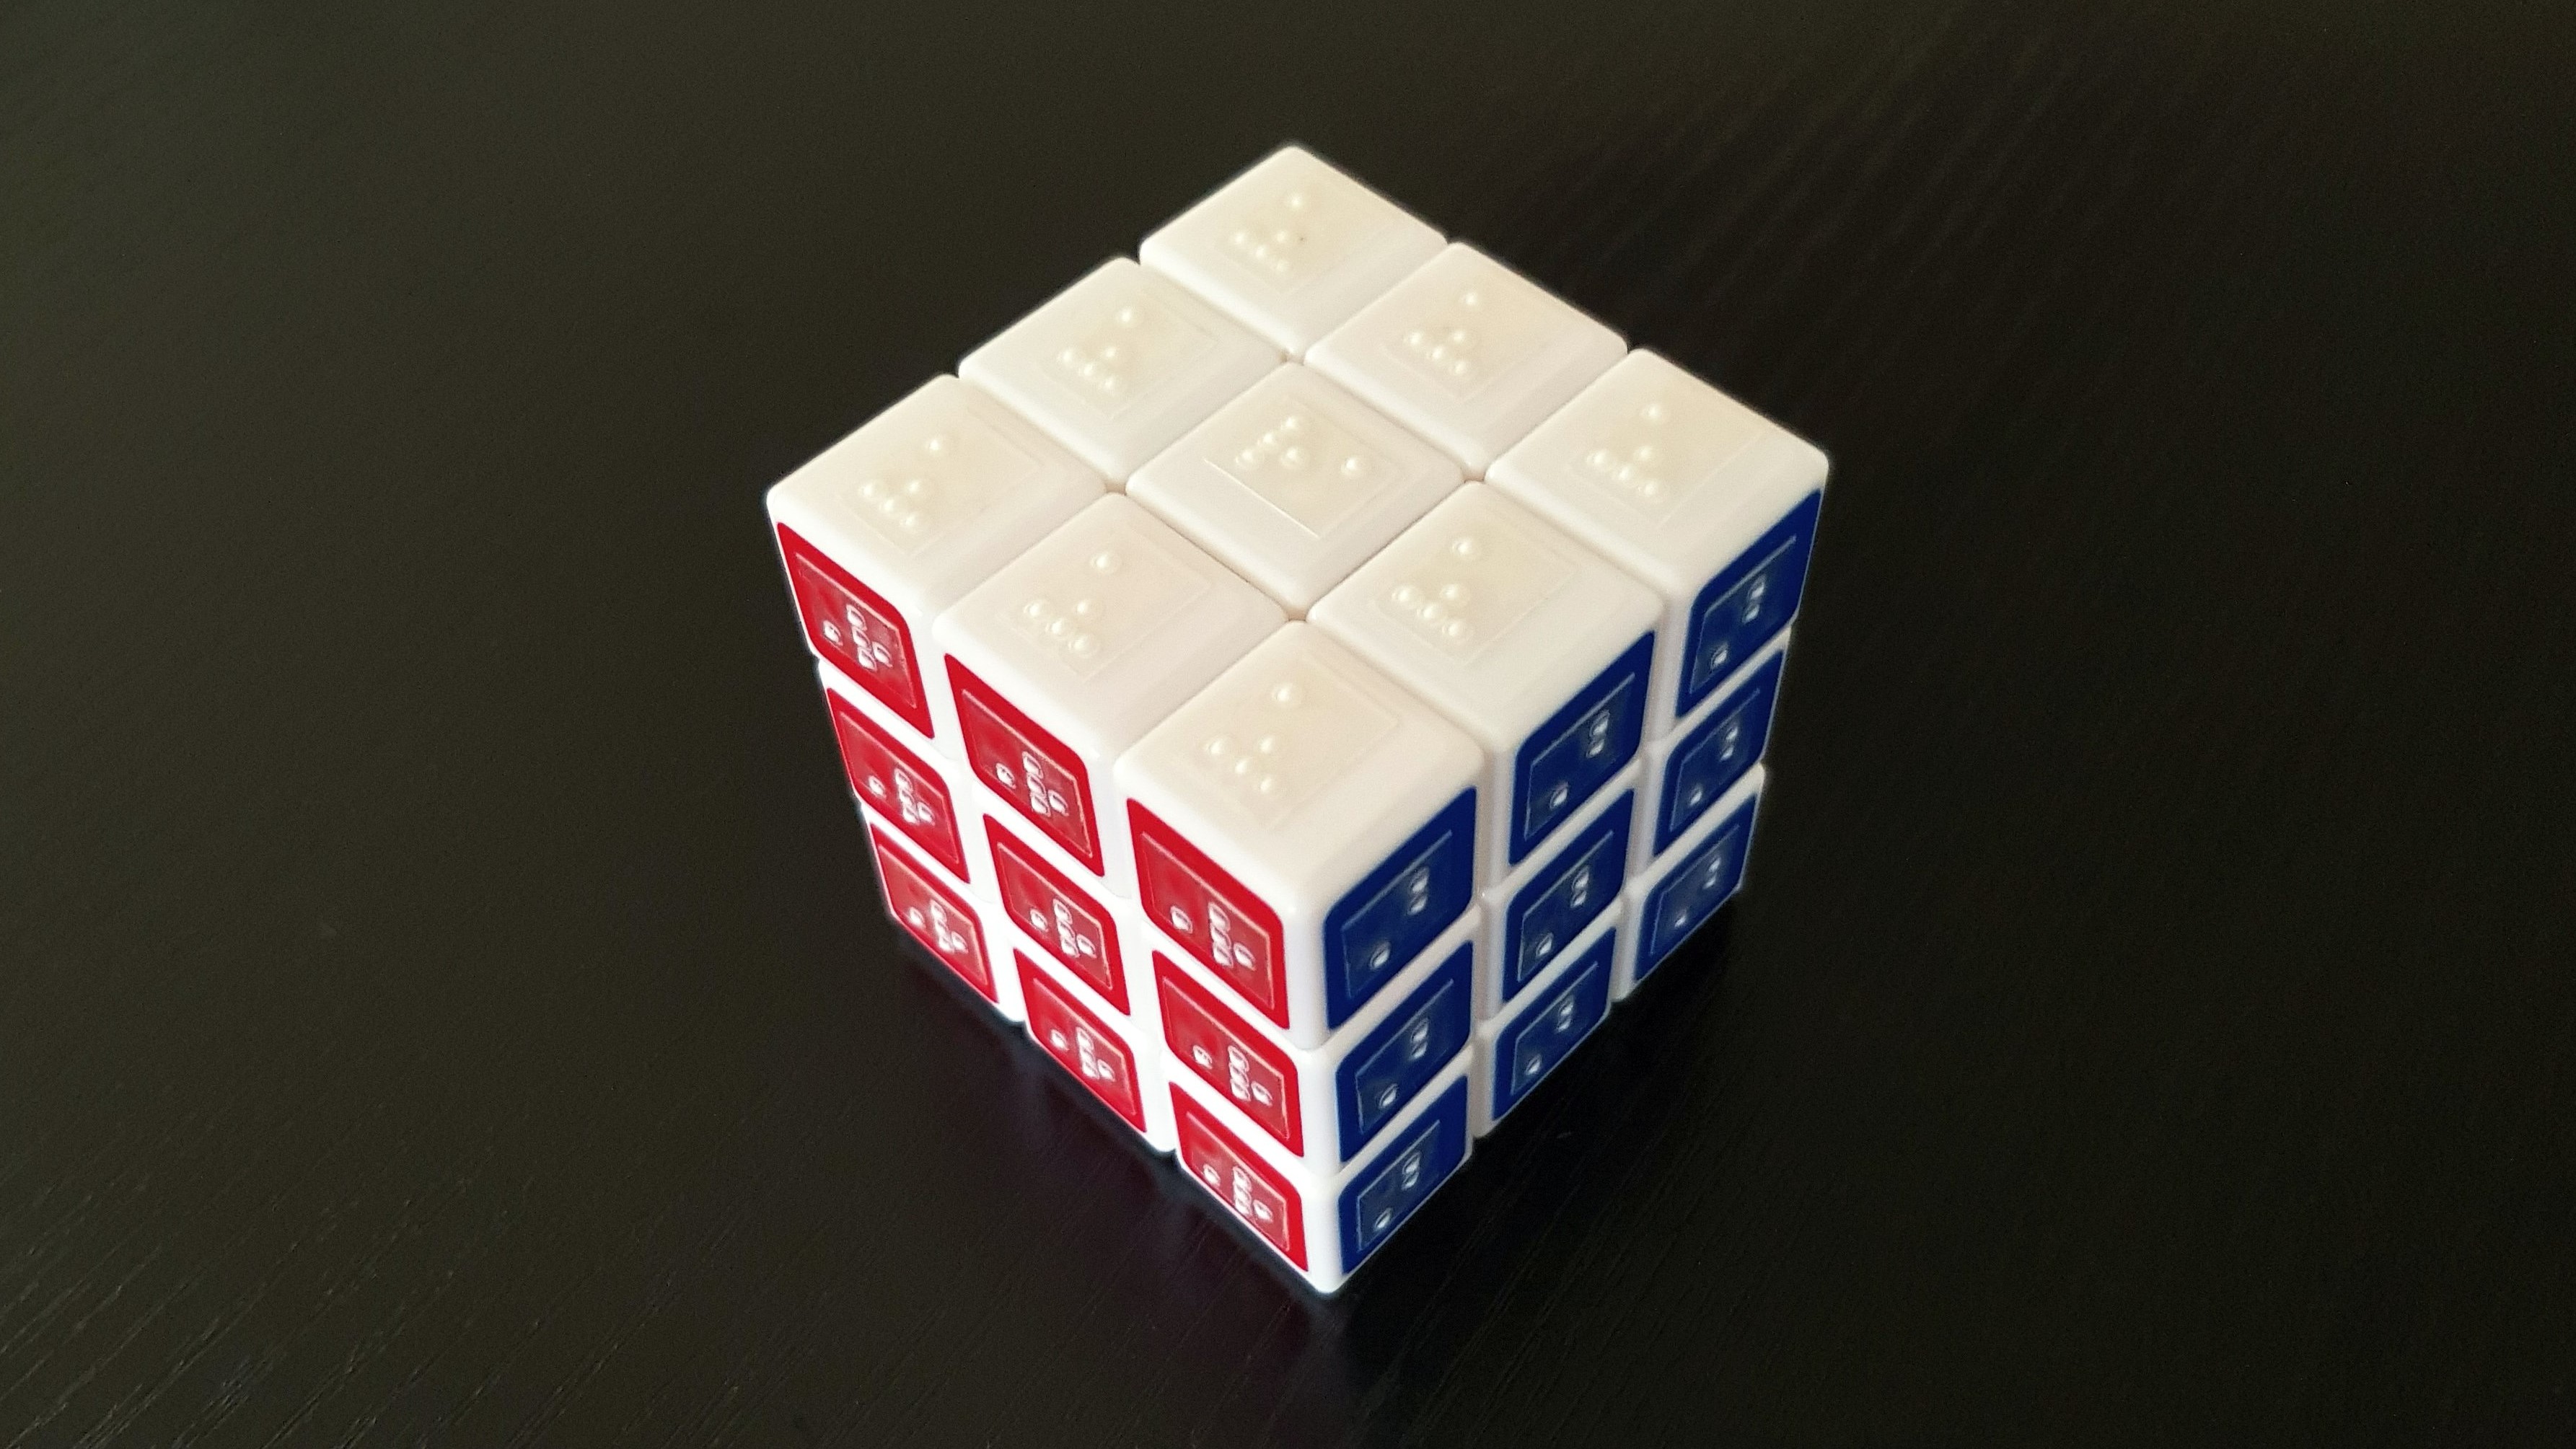 A colourful puzzle cube with braille labels on each small square.